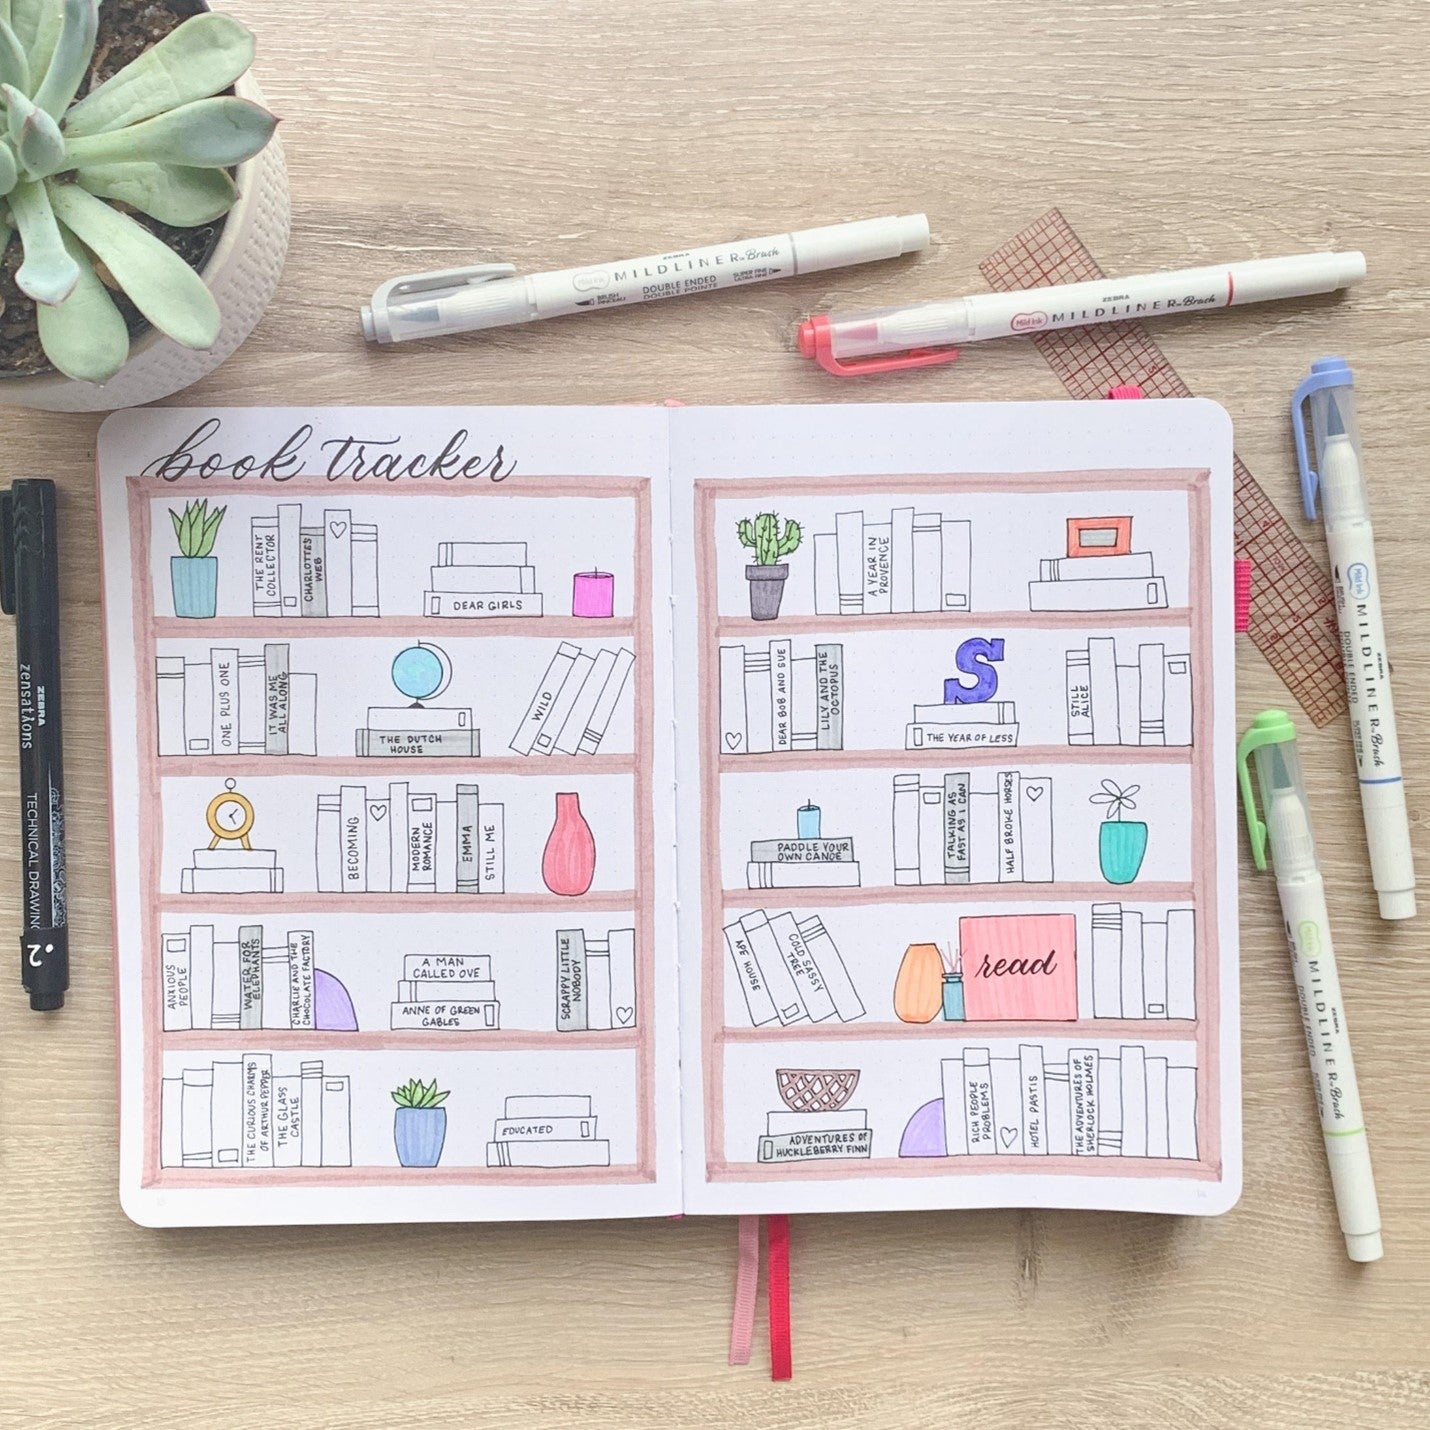 Track Your Reading Journey with These Creative Bullet Journal Book Trackers